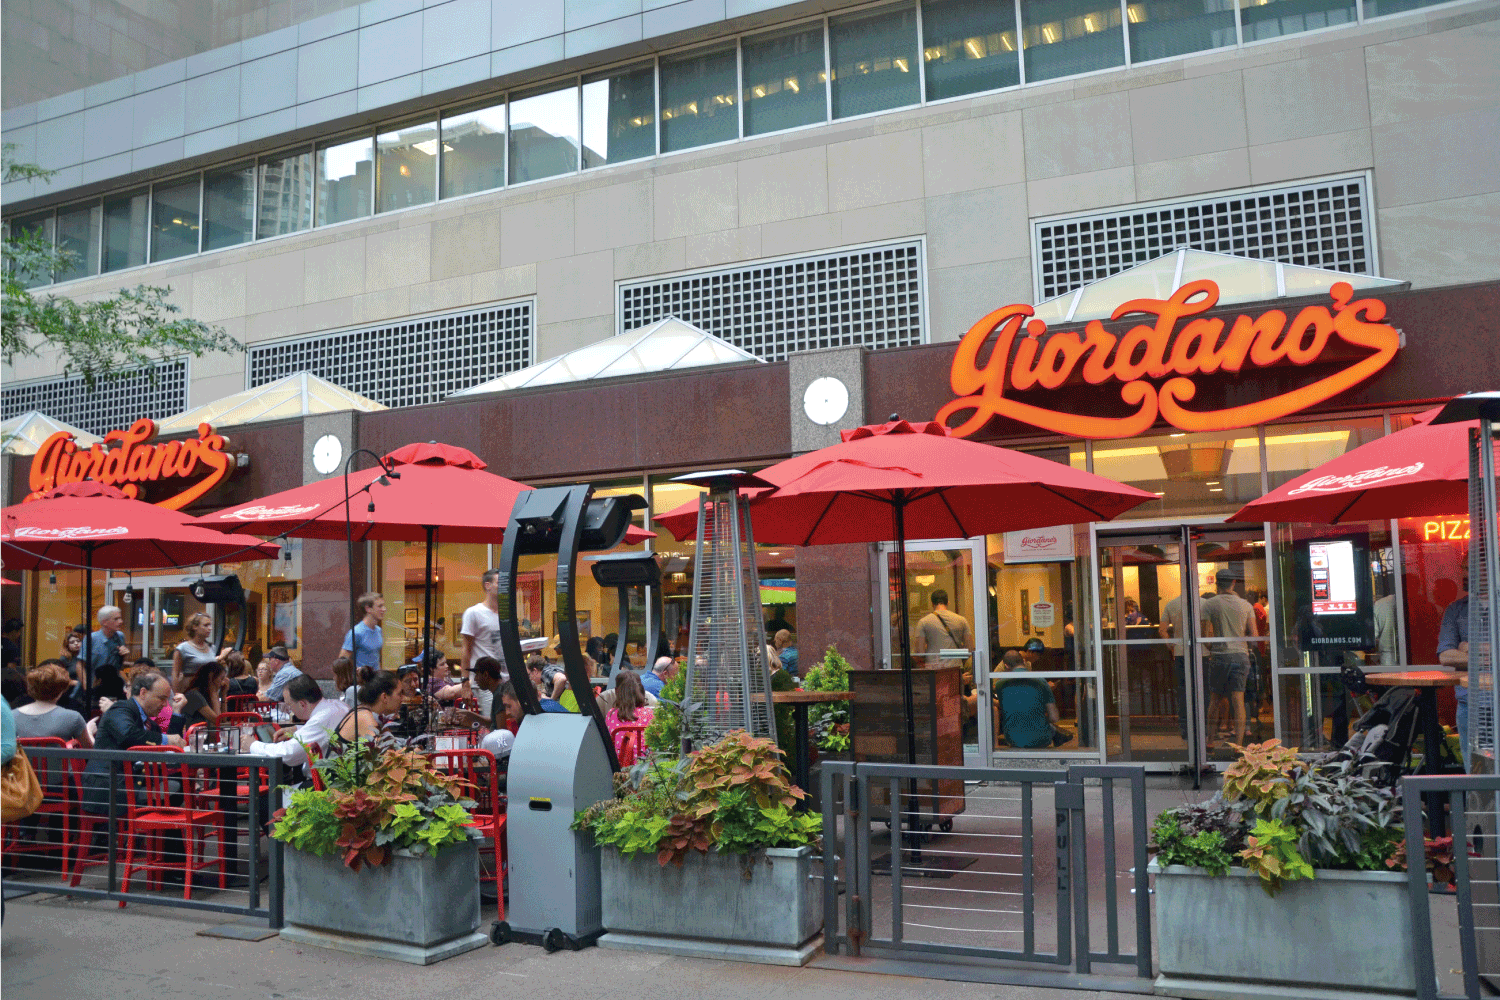 people at Giordano's restaurant in the Loop District, Chicago, USA. The restaurant is famous for the Chicago style deep dish pizza